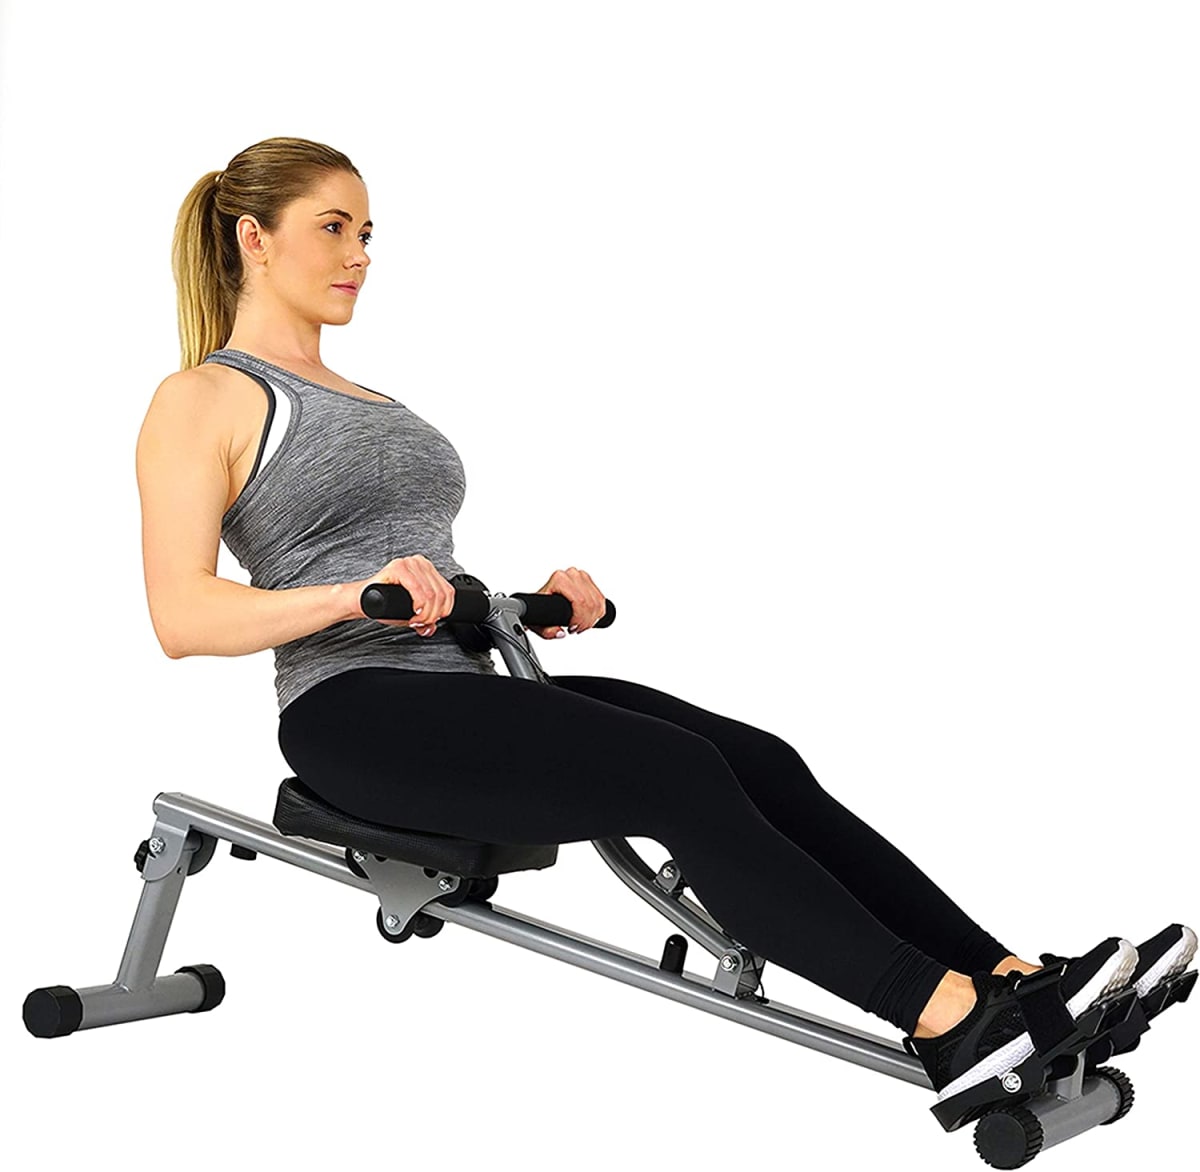 SF-RW1205 Rowing Machine Rower with 12 Level Adjustable Resistance, Digital Monitor and 220 LB Max Weight